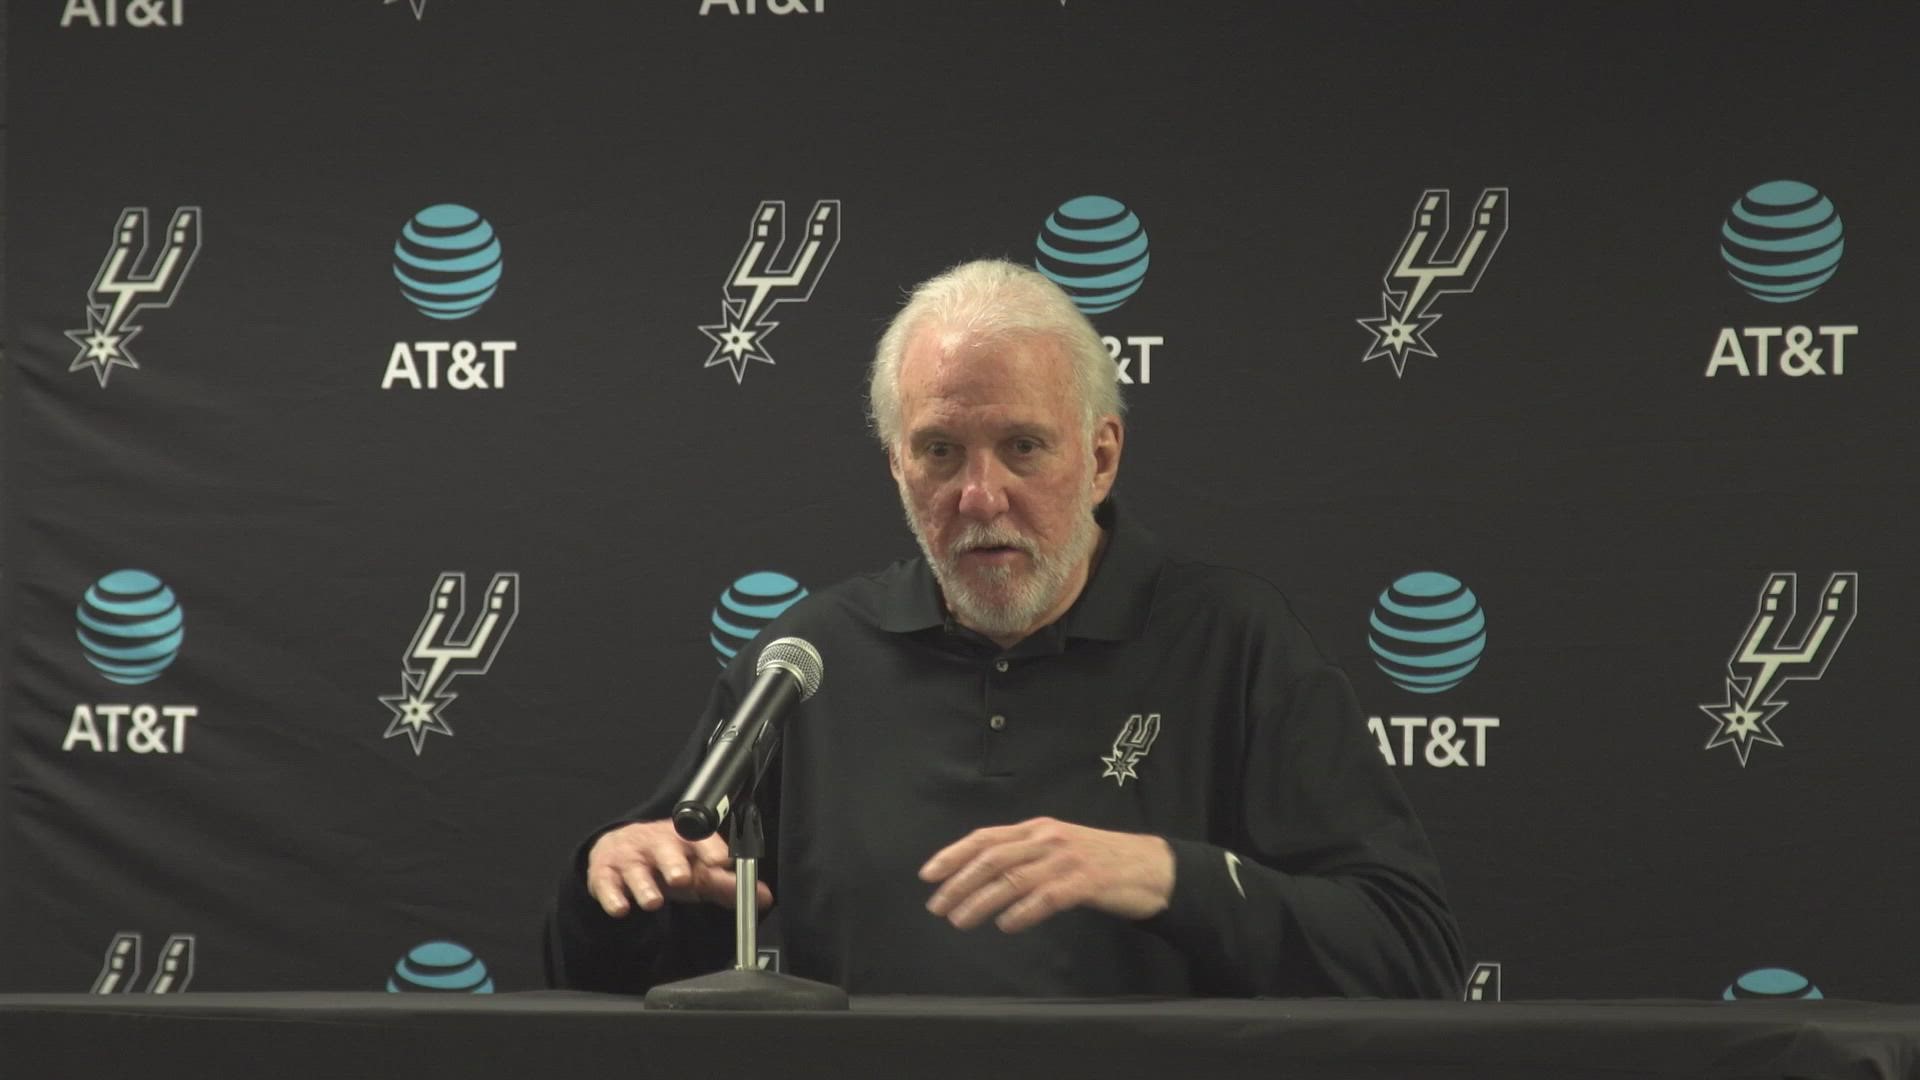 Pop loved the character that his team played with, and said he'd sleep well tonight despite the loss.